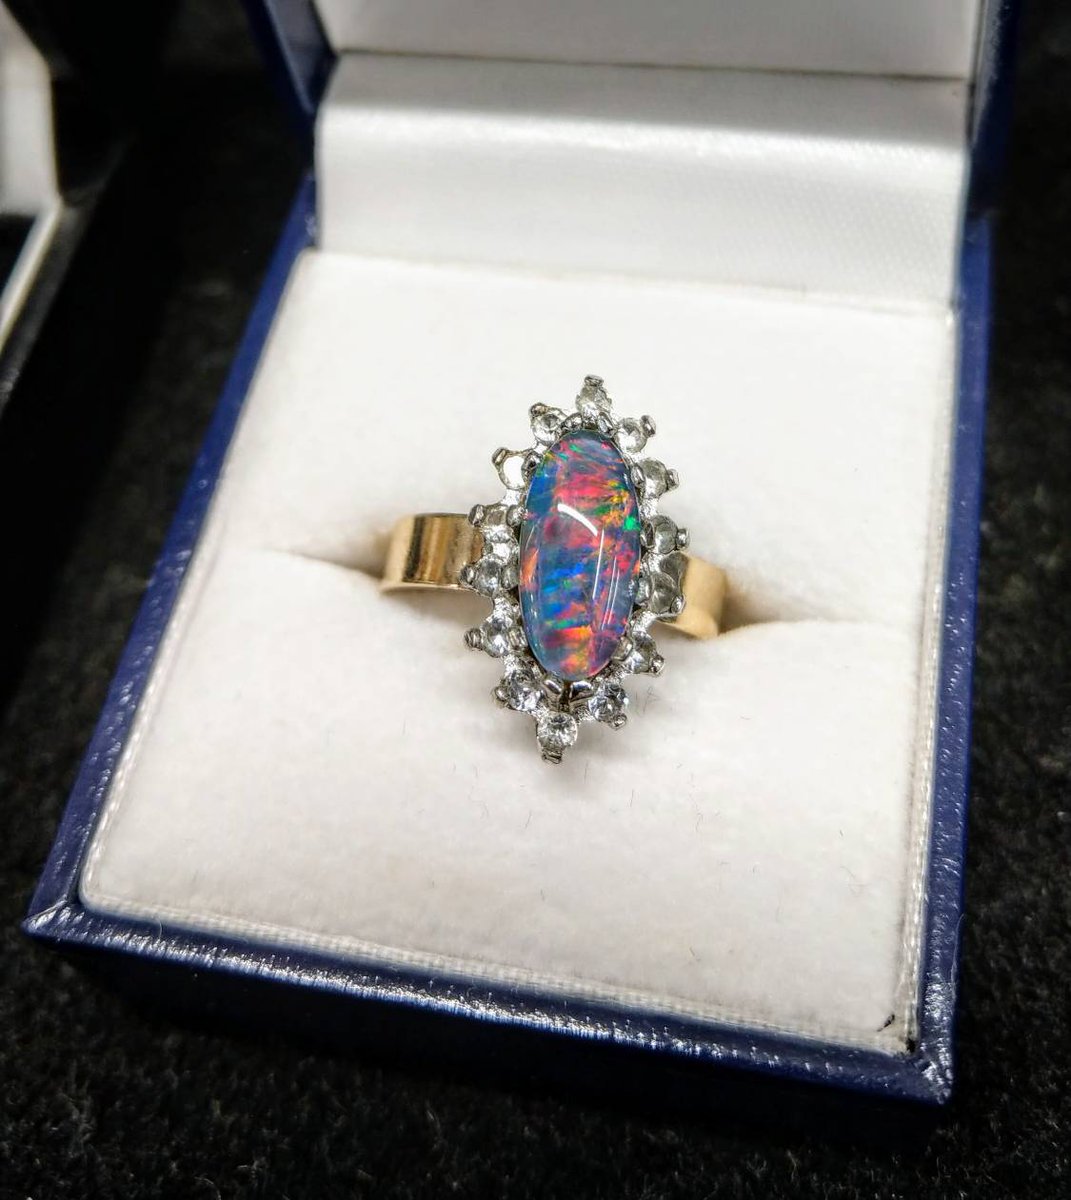 9ct Gold & opal ring. #LoveTheBarbican #Plymouth